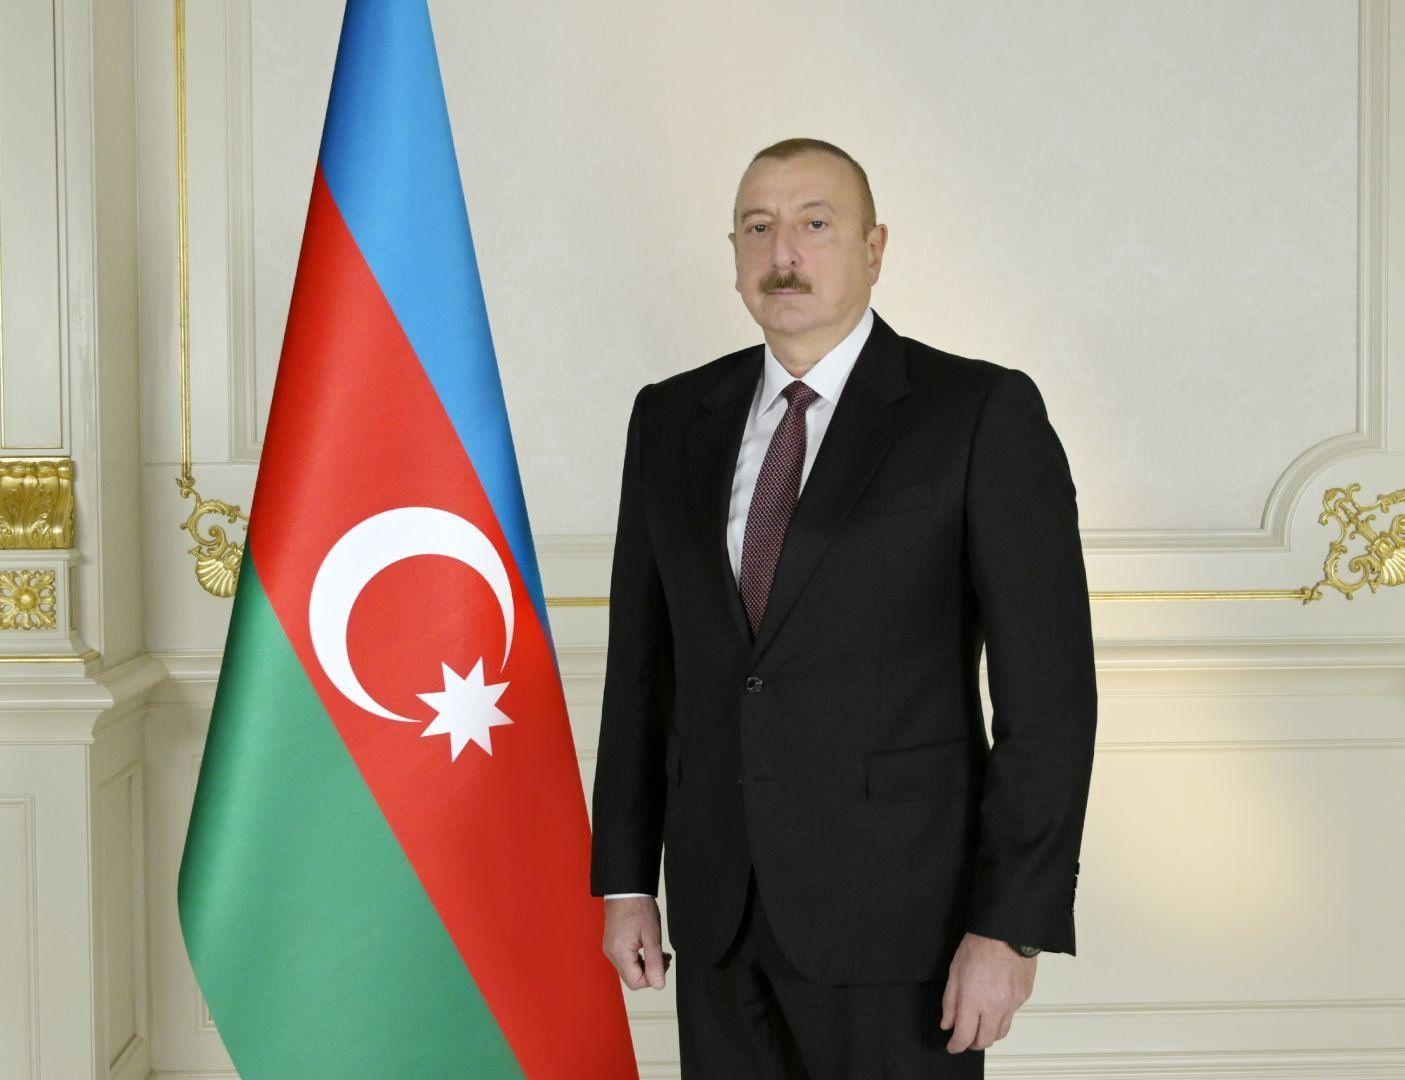 Ilham Aliyev wins presidential election with 92.05 percent of votes